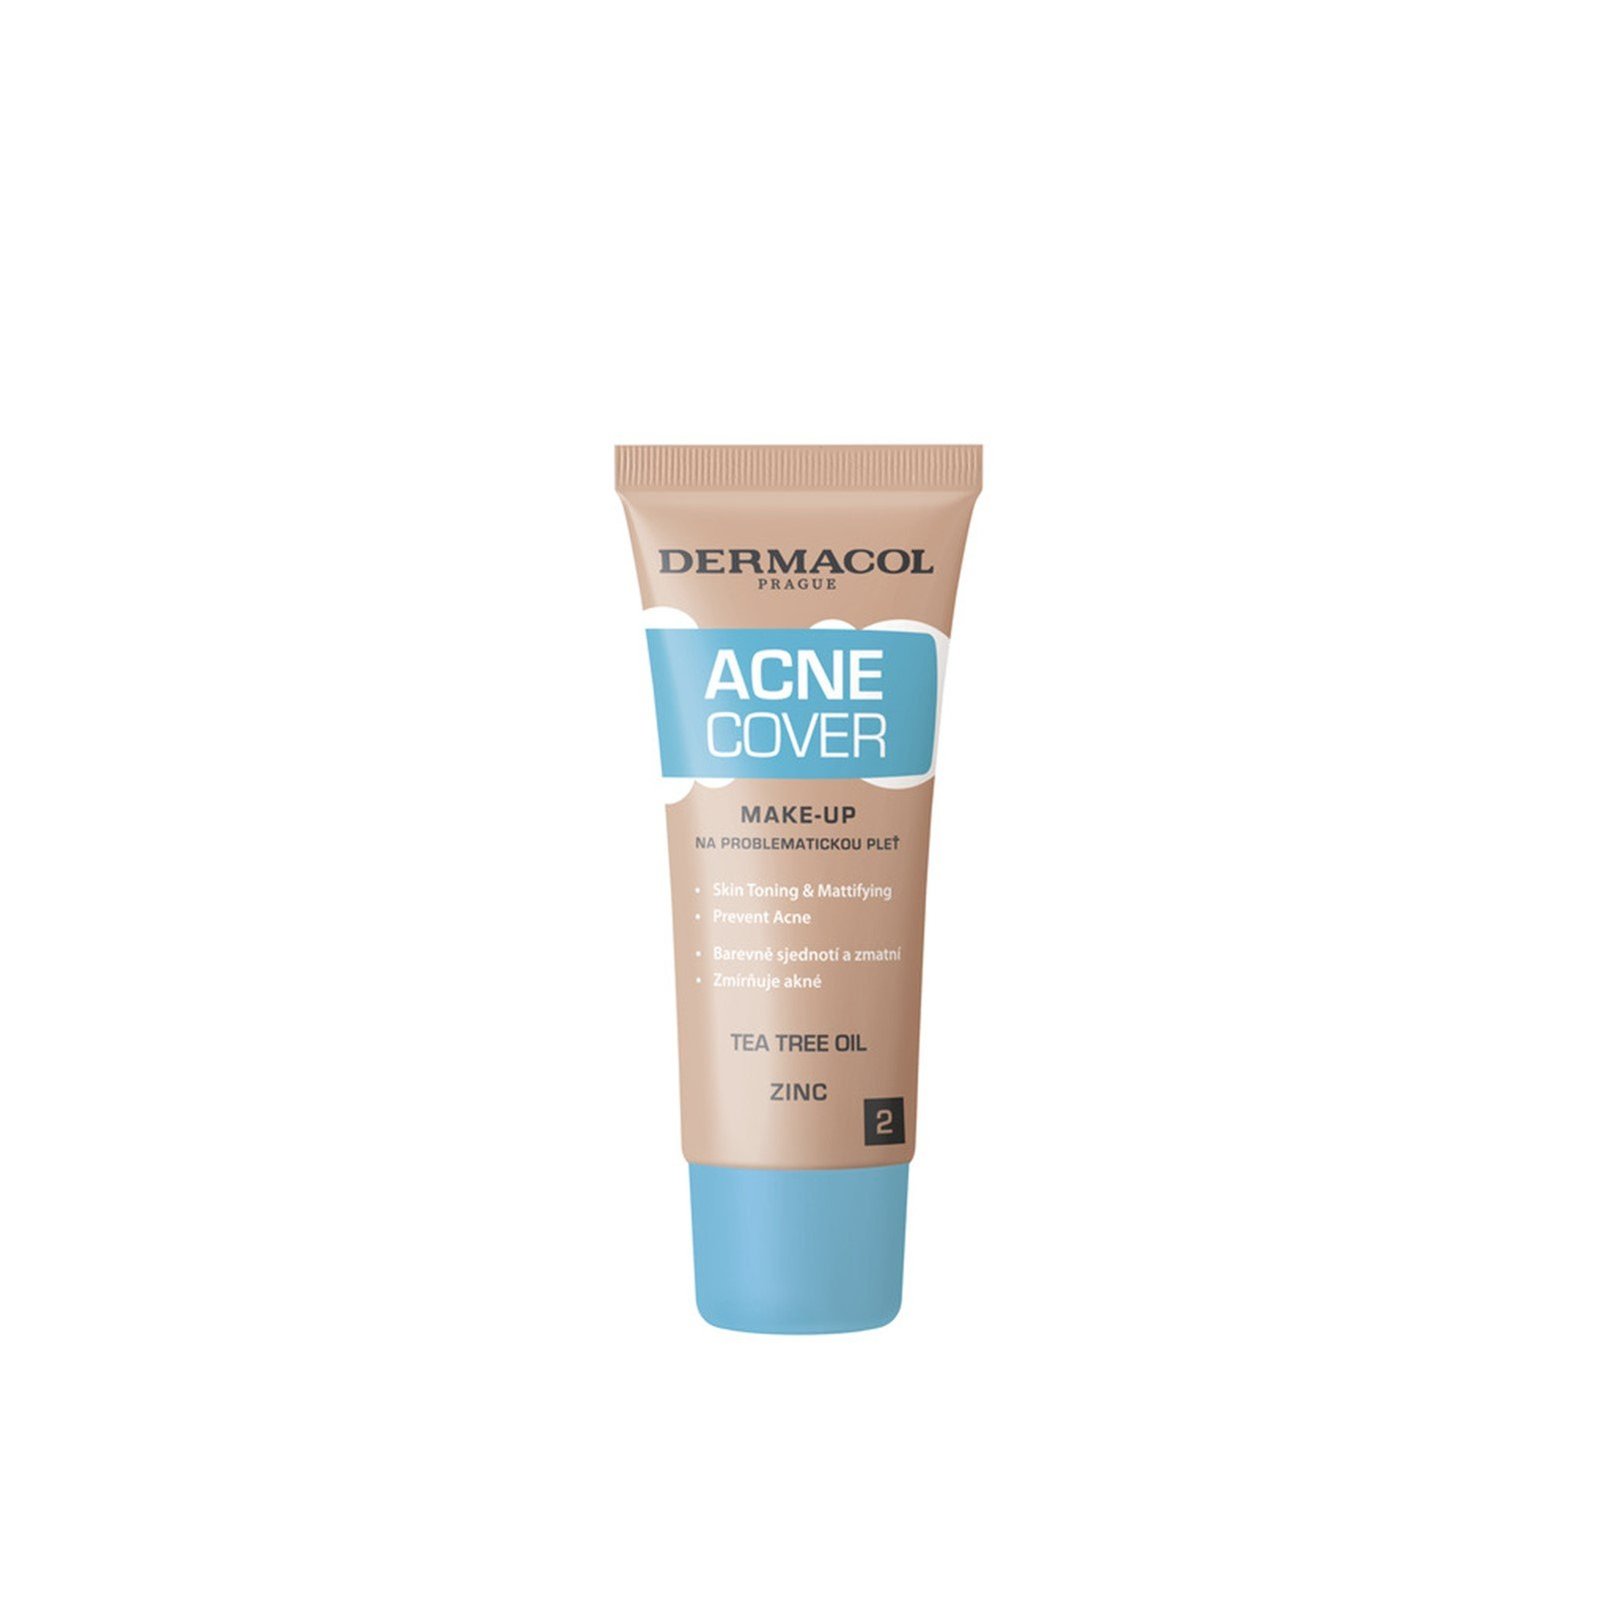 Dermacol Acnecover Make-Up 2 30ml